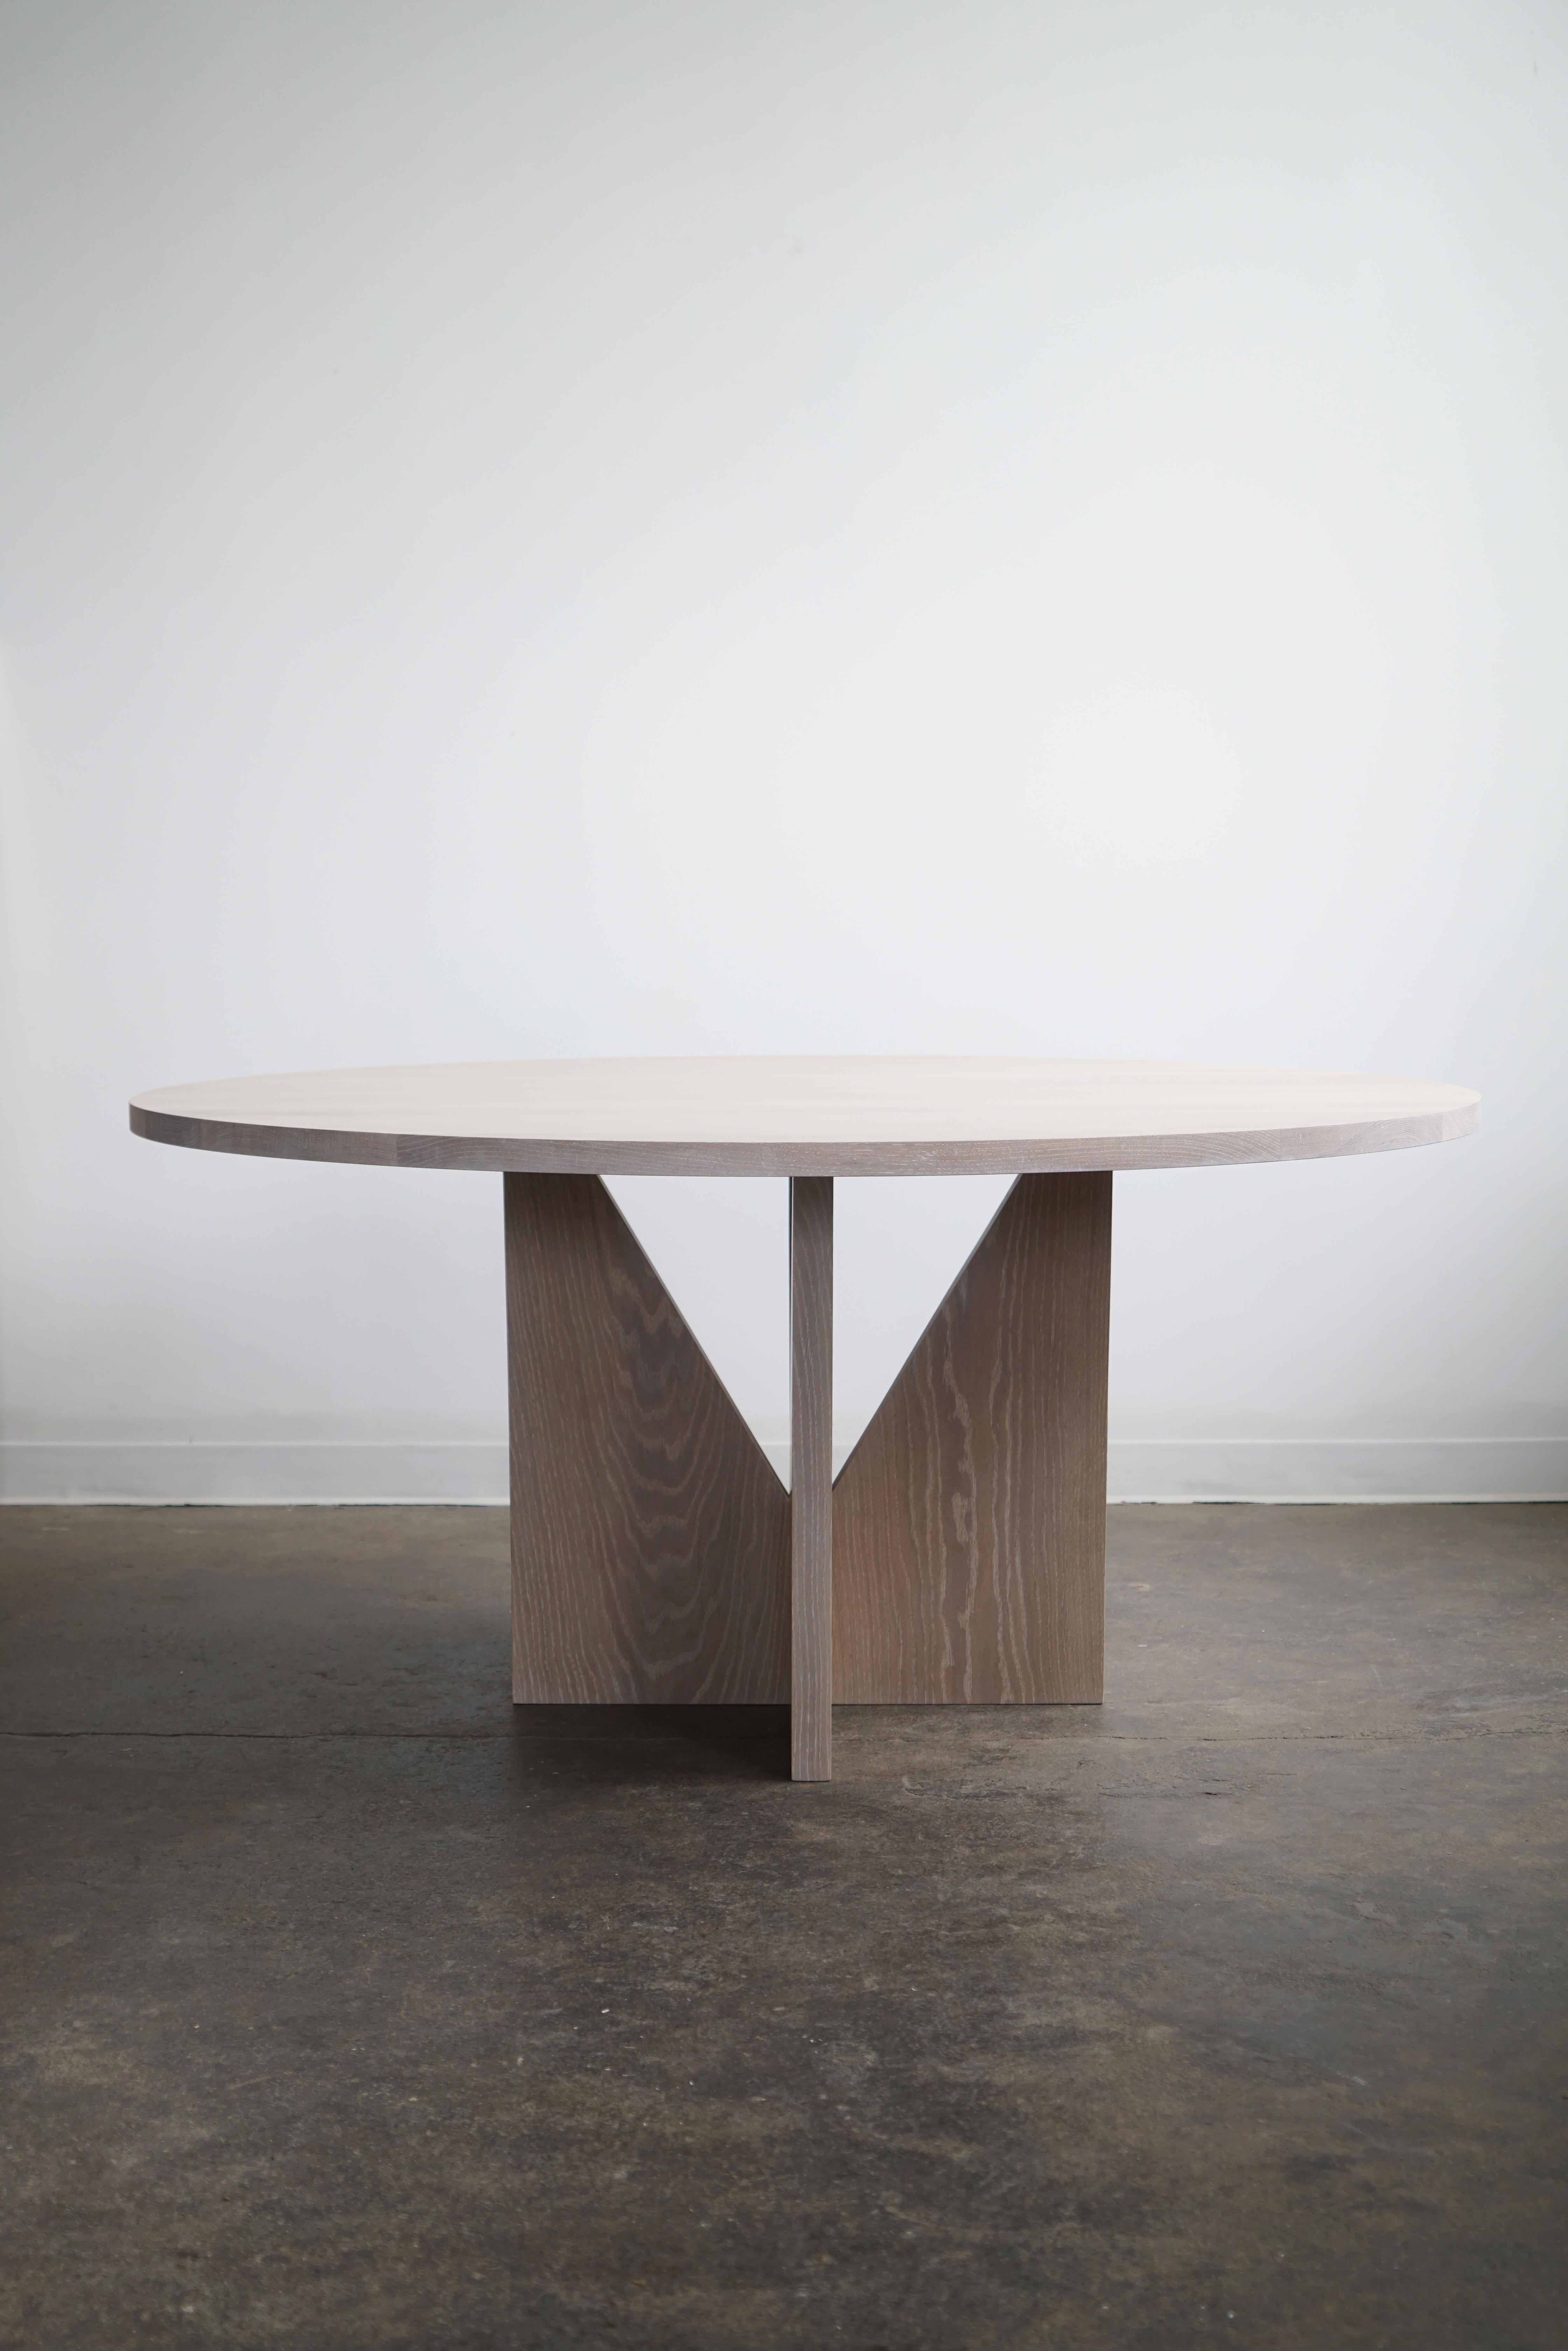 Contemporary round dining table with a solid wood top and legs by Last Workshop.
New, and made-to-order

Customers can choose from:
Wood species, finishes, and overall dimensions.


Dimensions shown: 65” diameter x 30